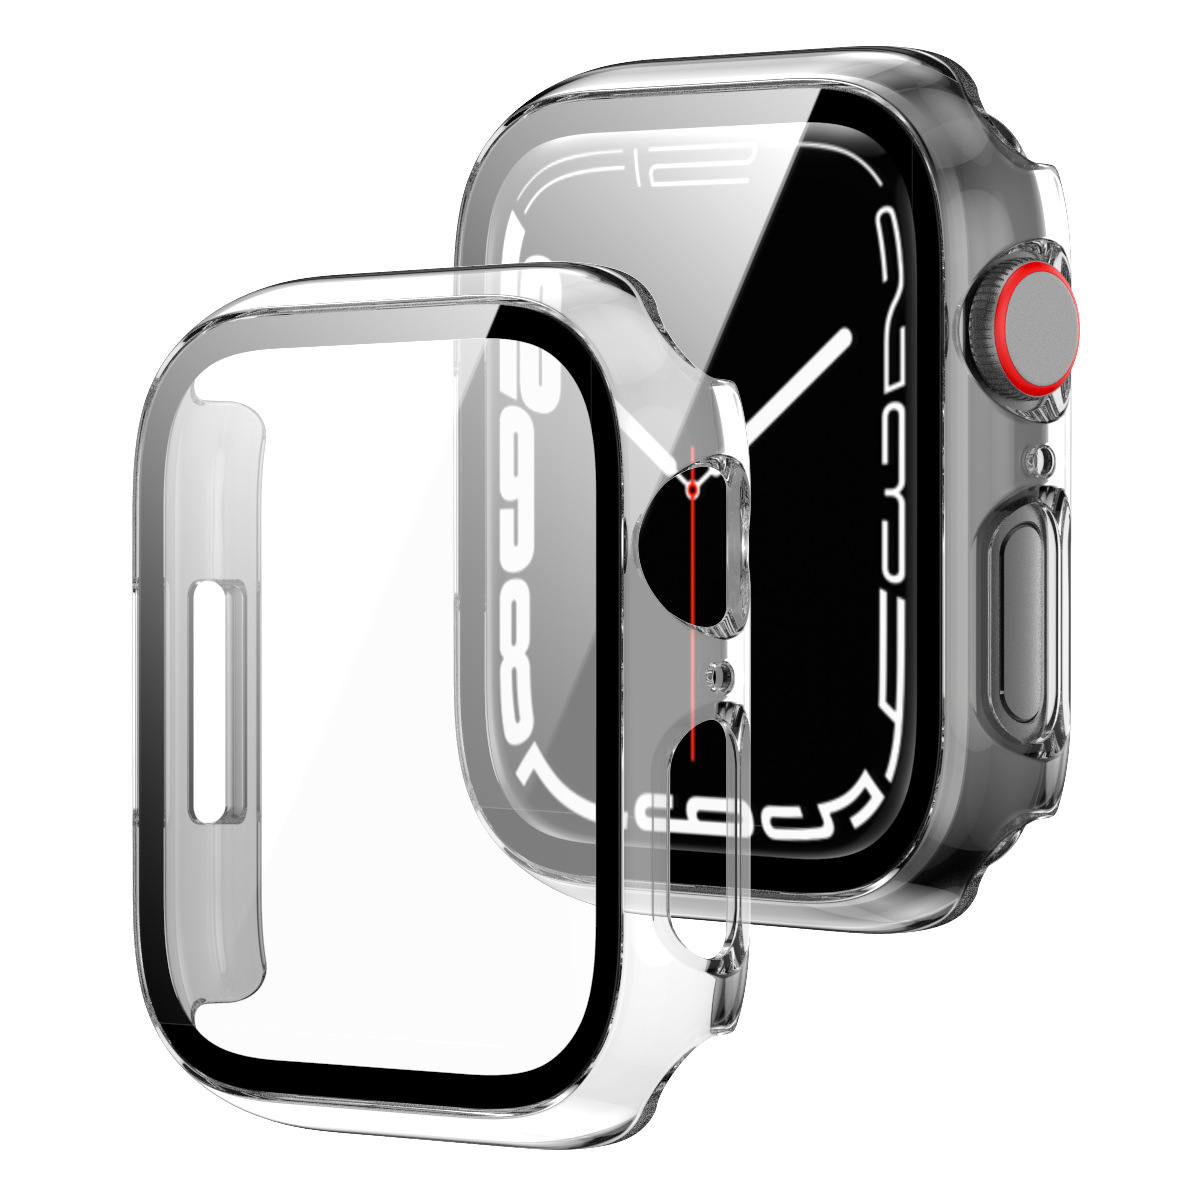 For Apple Watch Case PC All-in-One Case Apple Watch9 Protective Case iWatch Tempered Glass Film